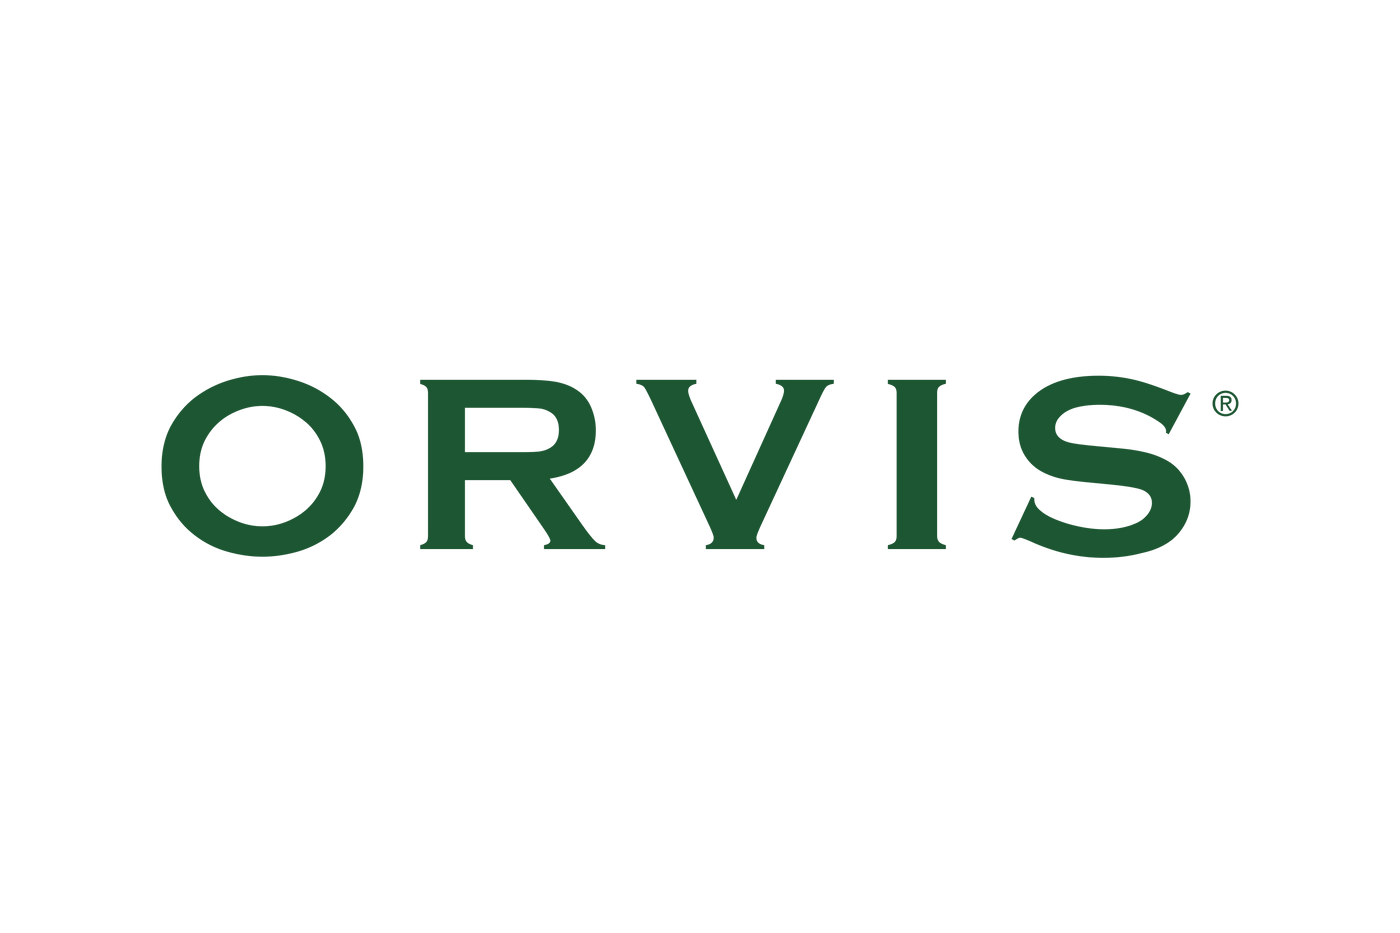 Orvis Fly Lines